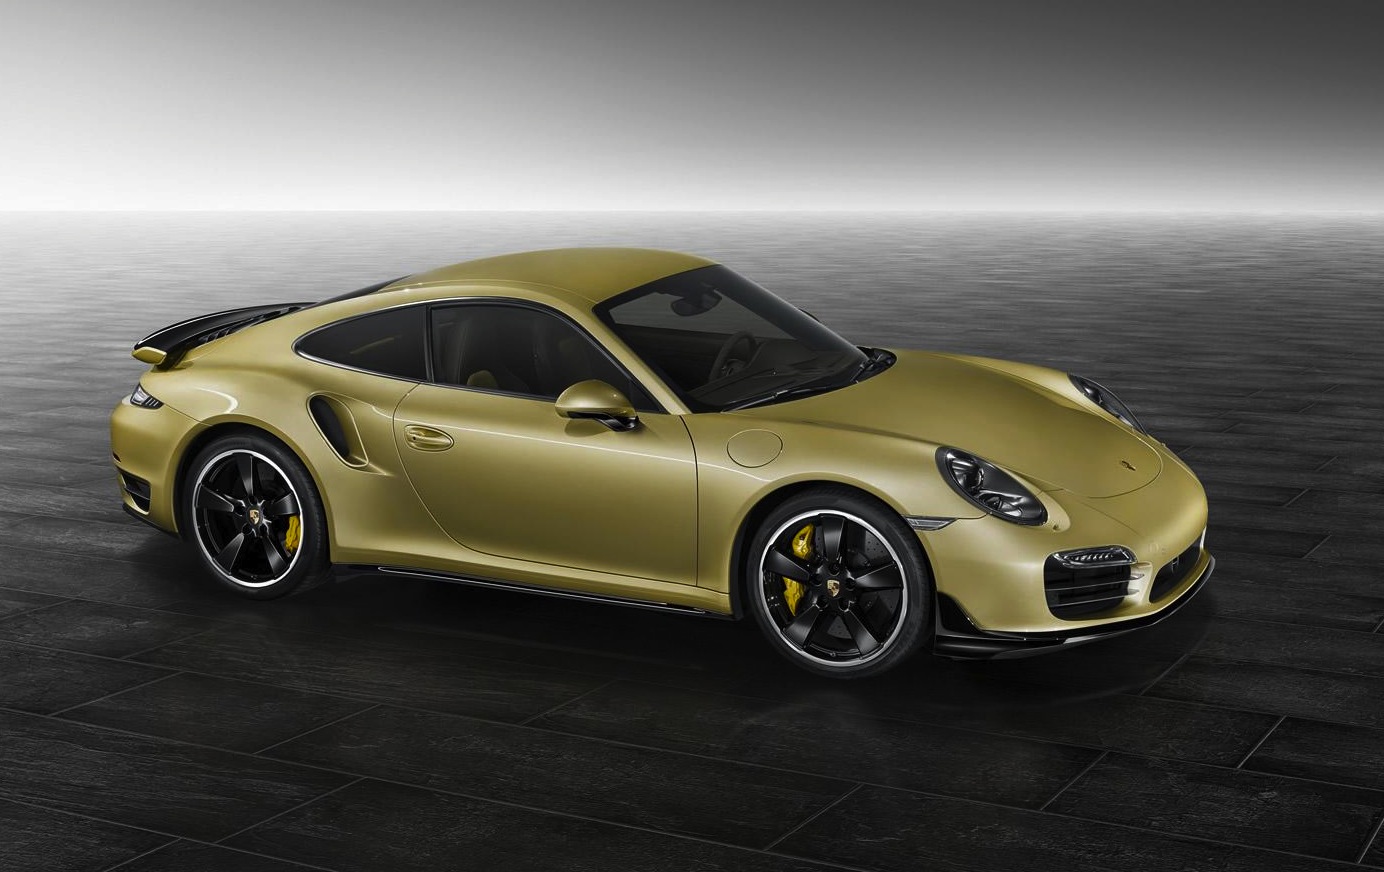 Porsche Exclusive announces new styling kit for 911 Turbo